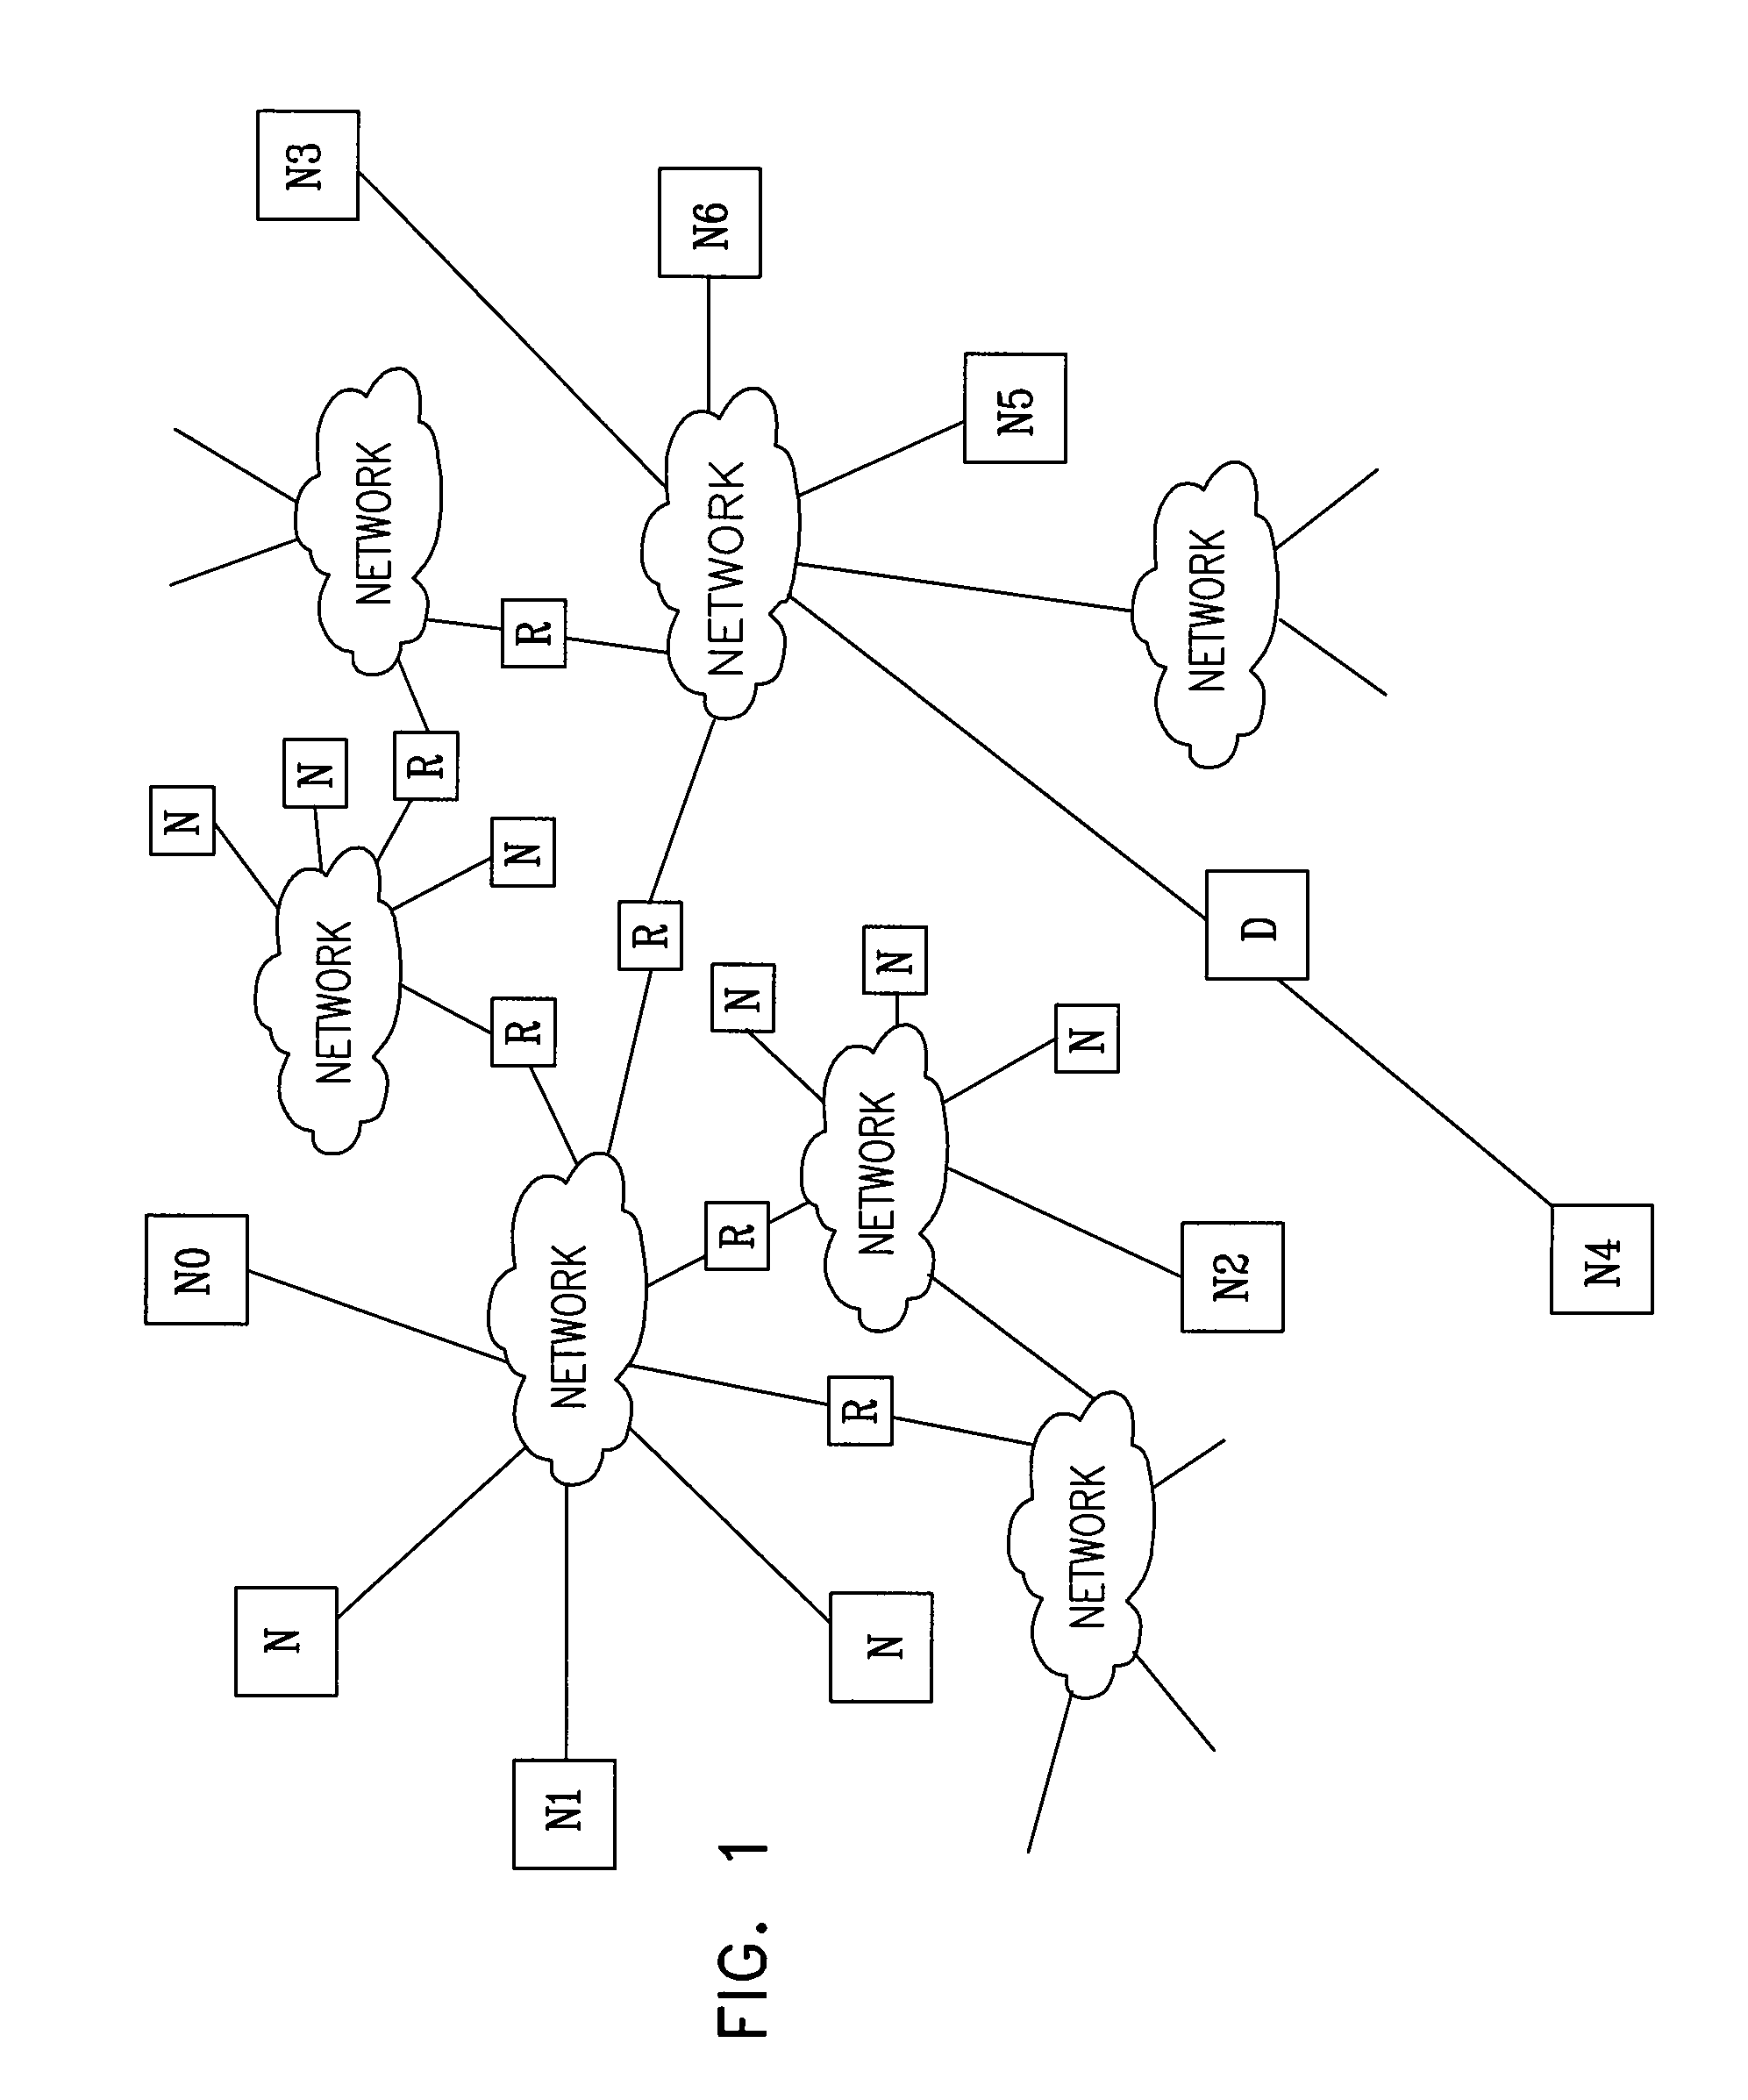 Weighted fair queuing-based methods and apparatus for protecting against overload conditions on nodes of a distributed network